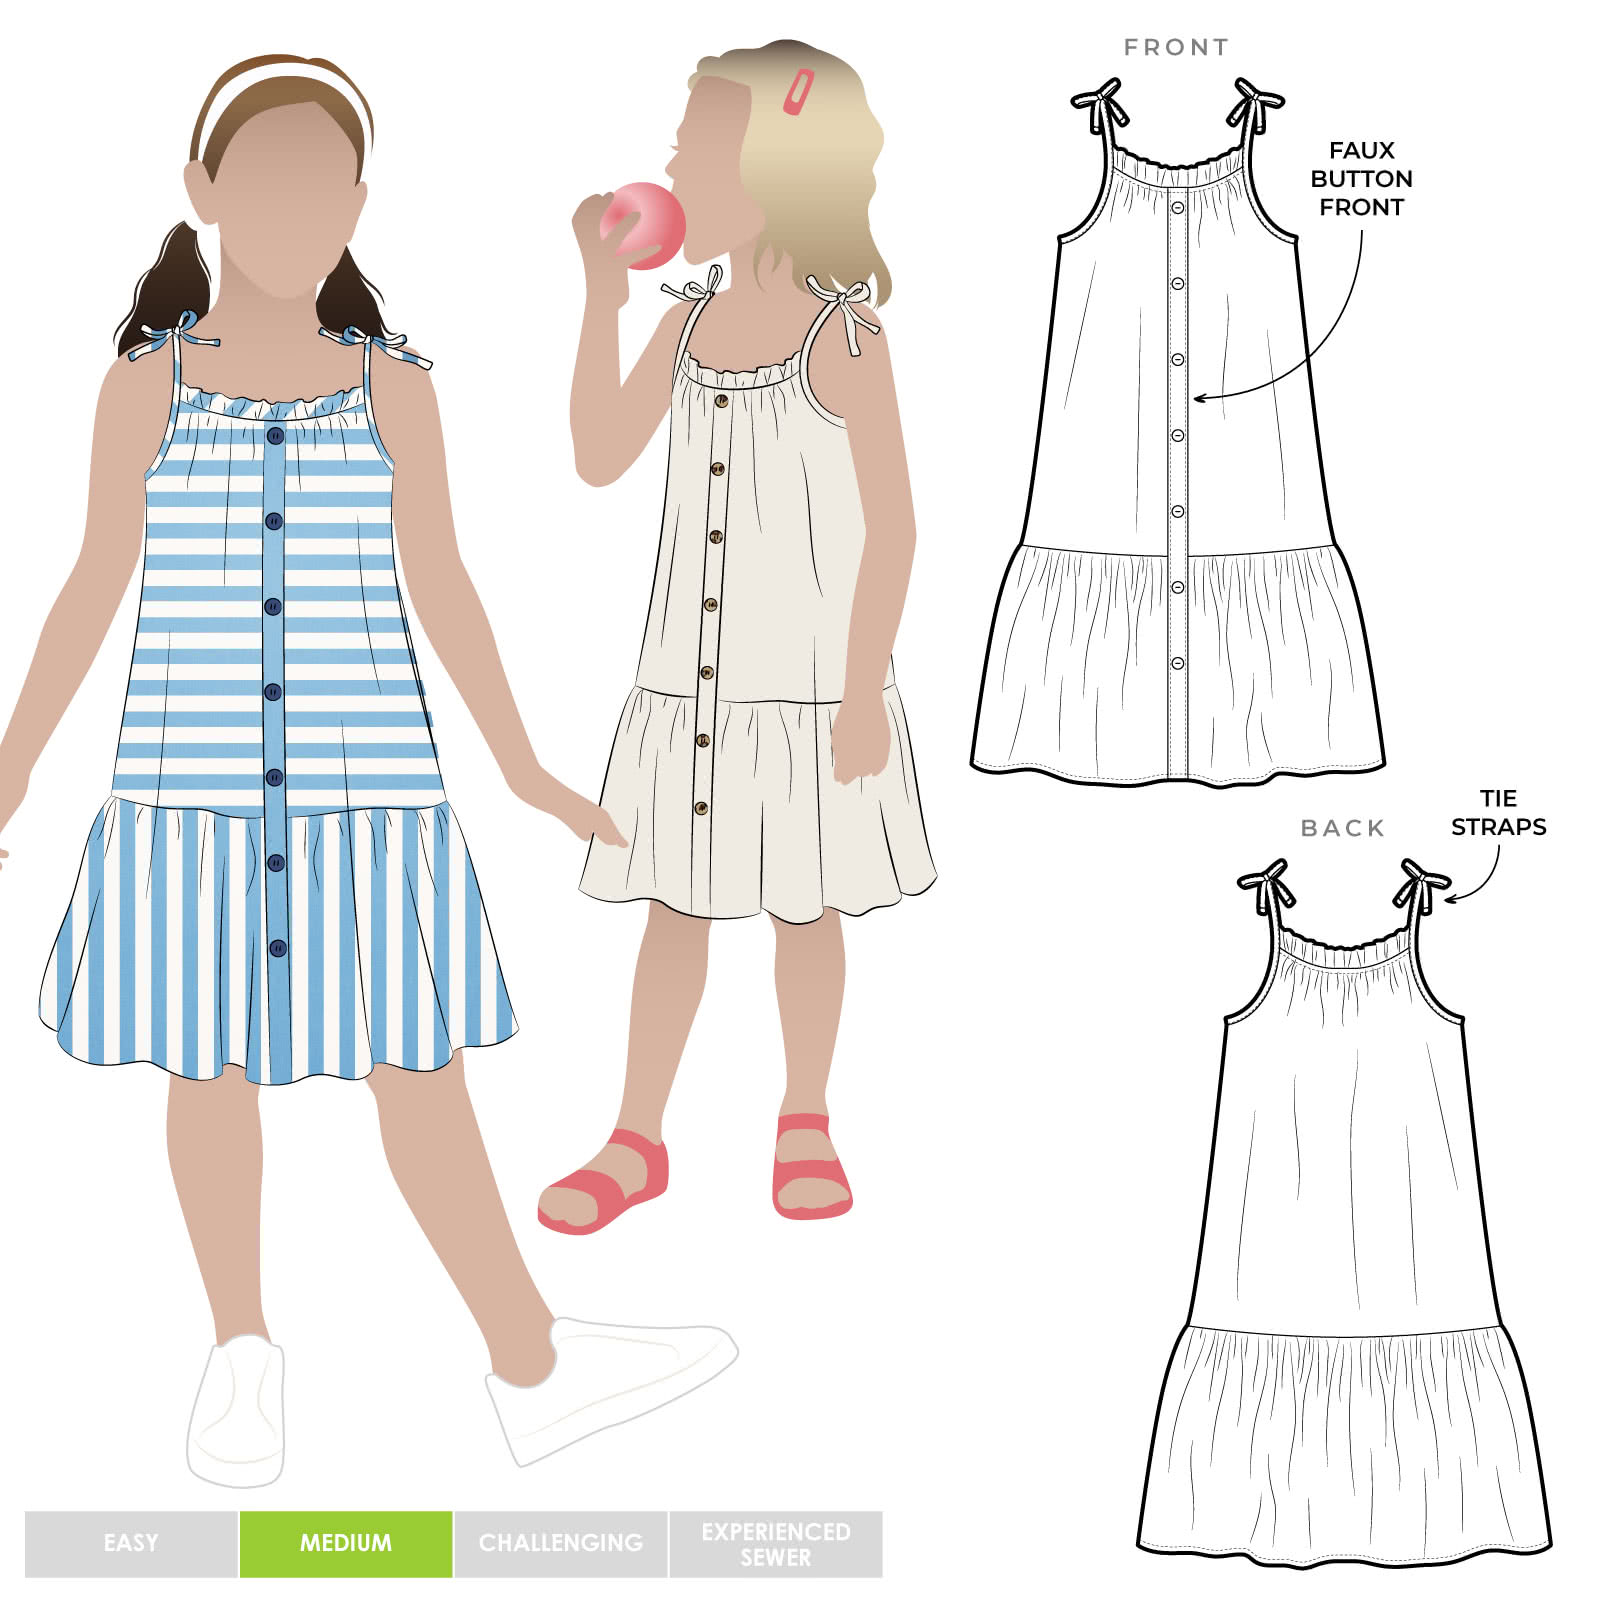 Claudia Kids Dress By Style Arc - A-line swing dress with spaghetti strap ties and hem frill, for kids 2-8